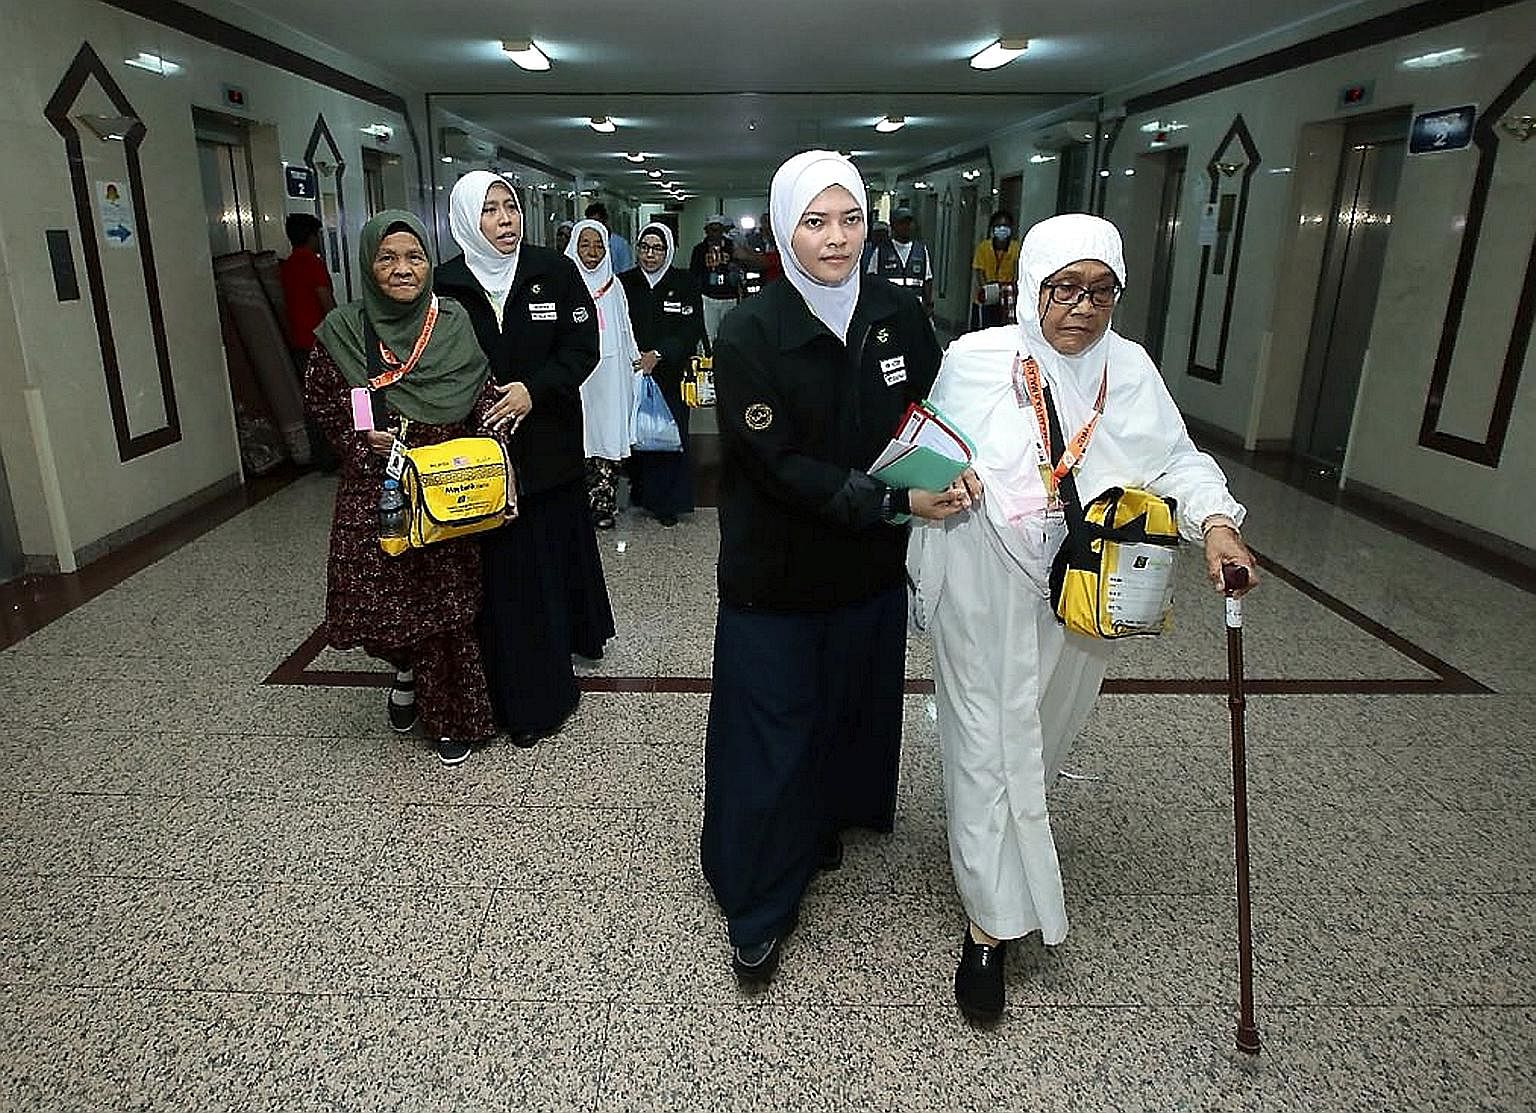 Elderly Malaysians being received by Tabung Haji staff (in black) on their arrival at a hotel in Mecca during the haj season in August. The government is taking over assets TH bought for nearly RM20 billion that are now worth RM9 billion less.